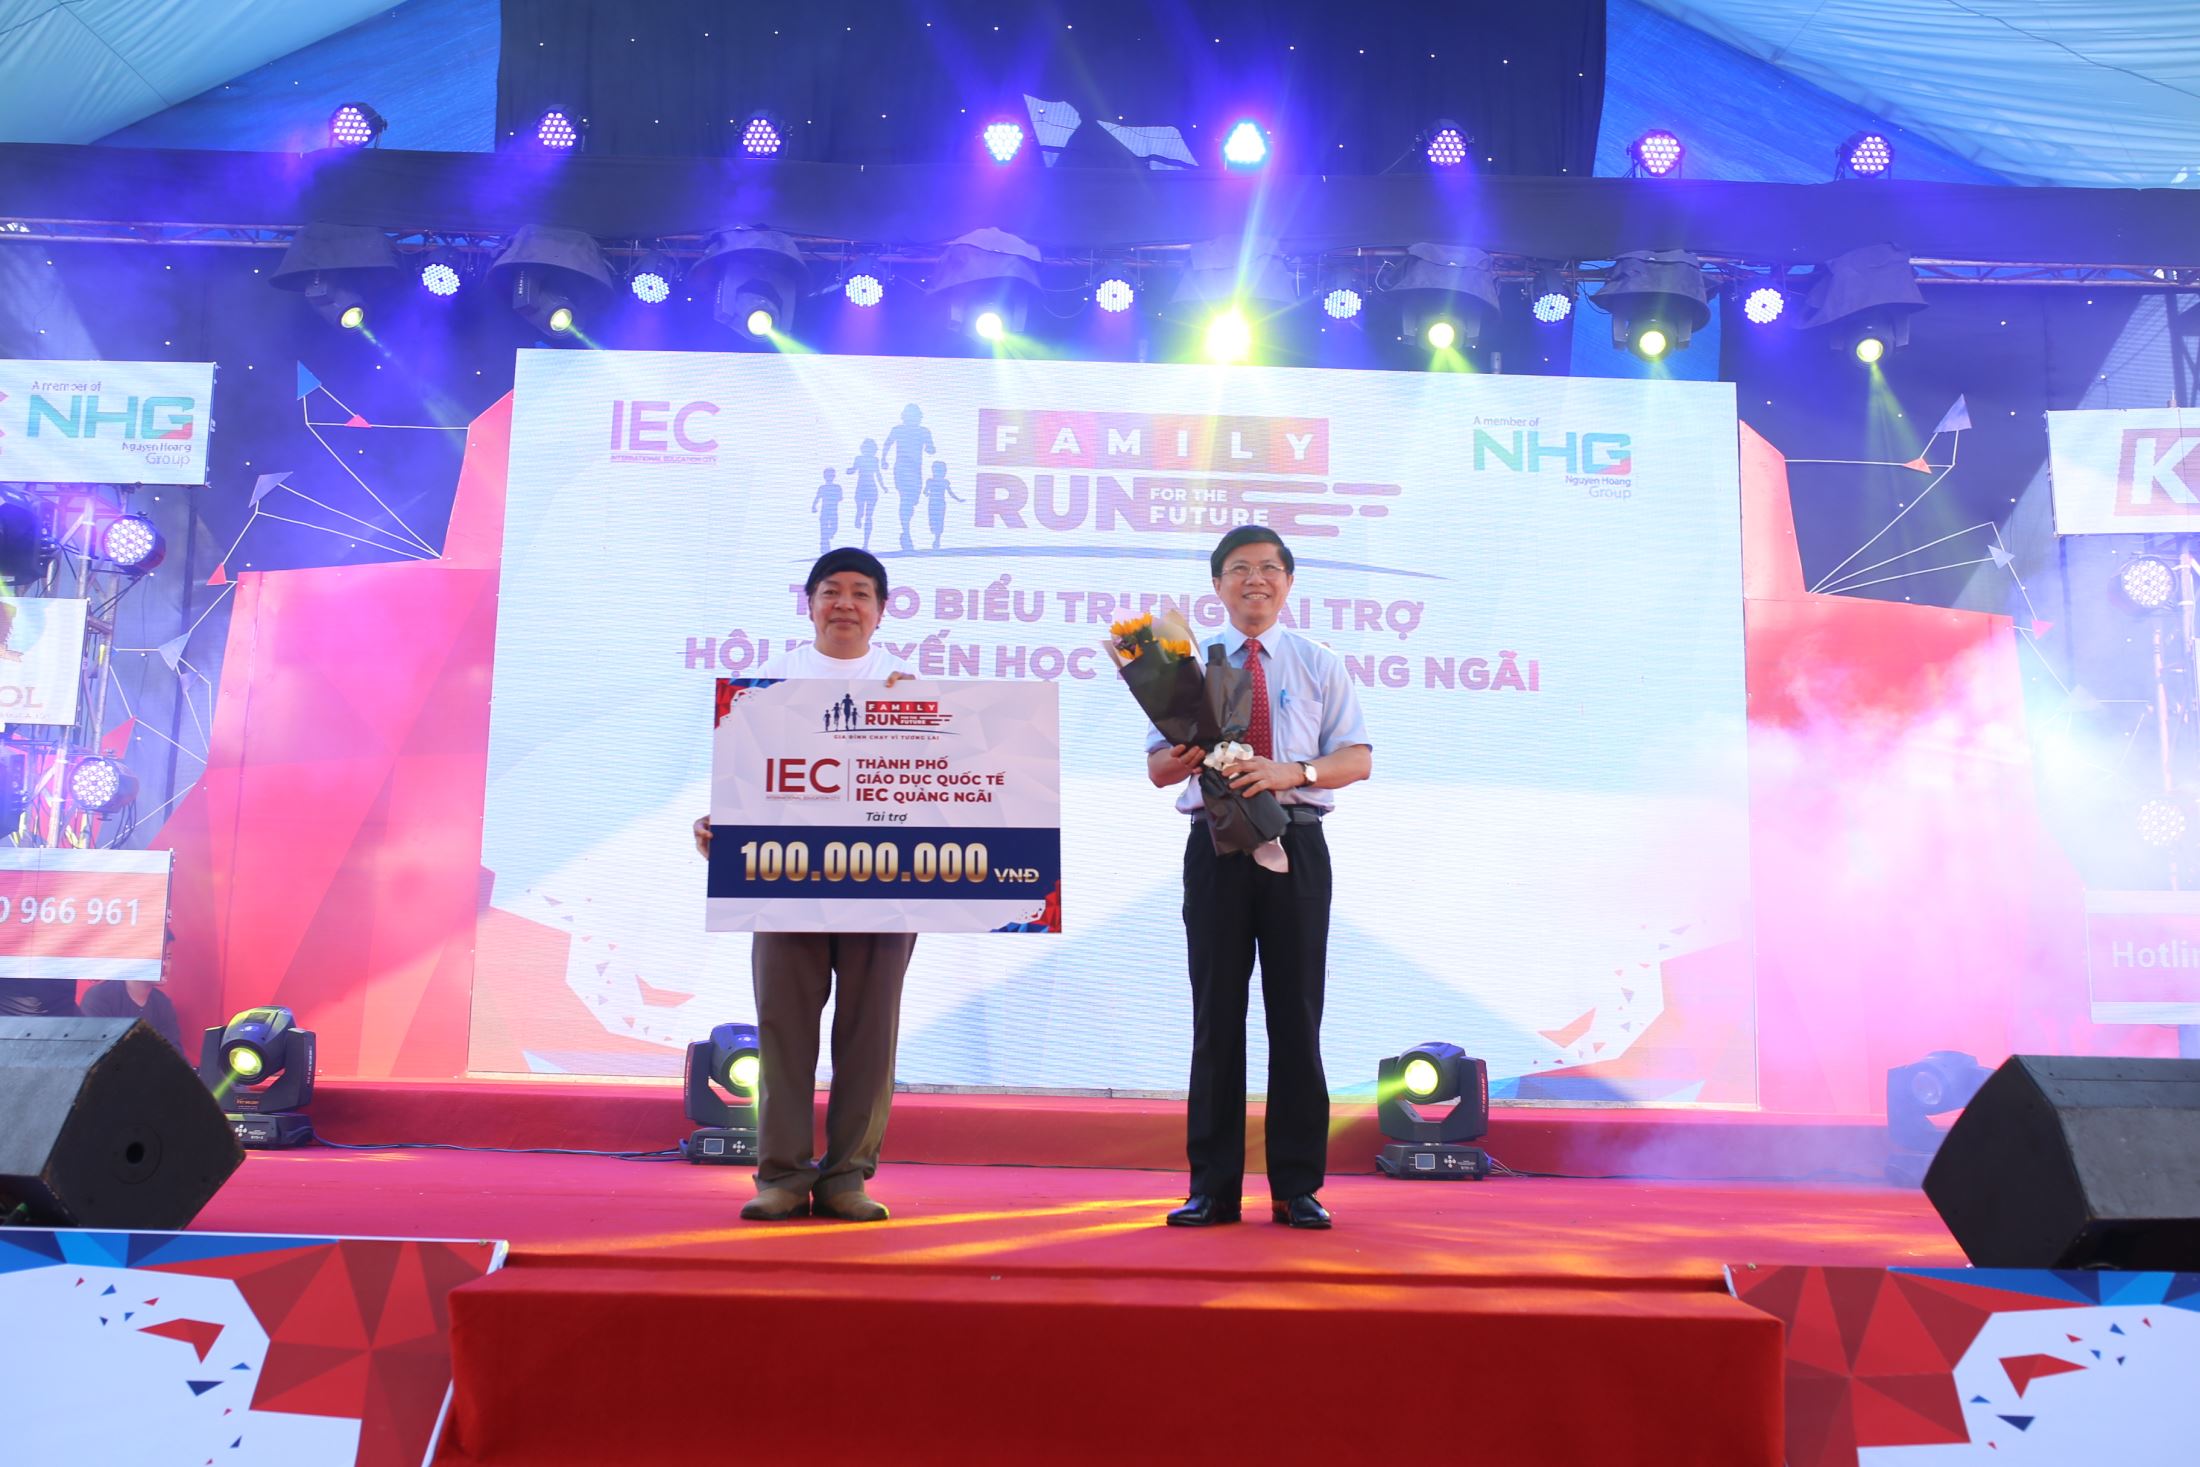 Dr. Pham Van Hung awarding 100 million dong from IEC Quang Ngai to the Study Promotion Association of Quang Ngai province